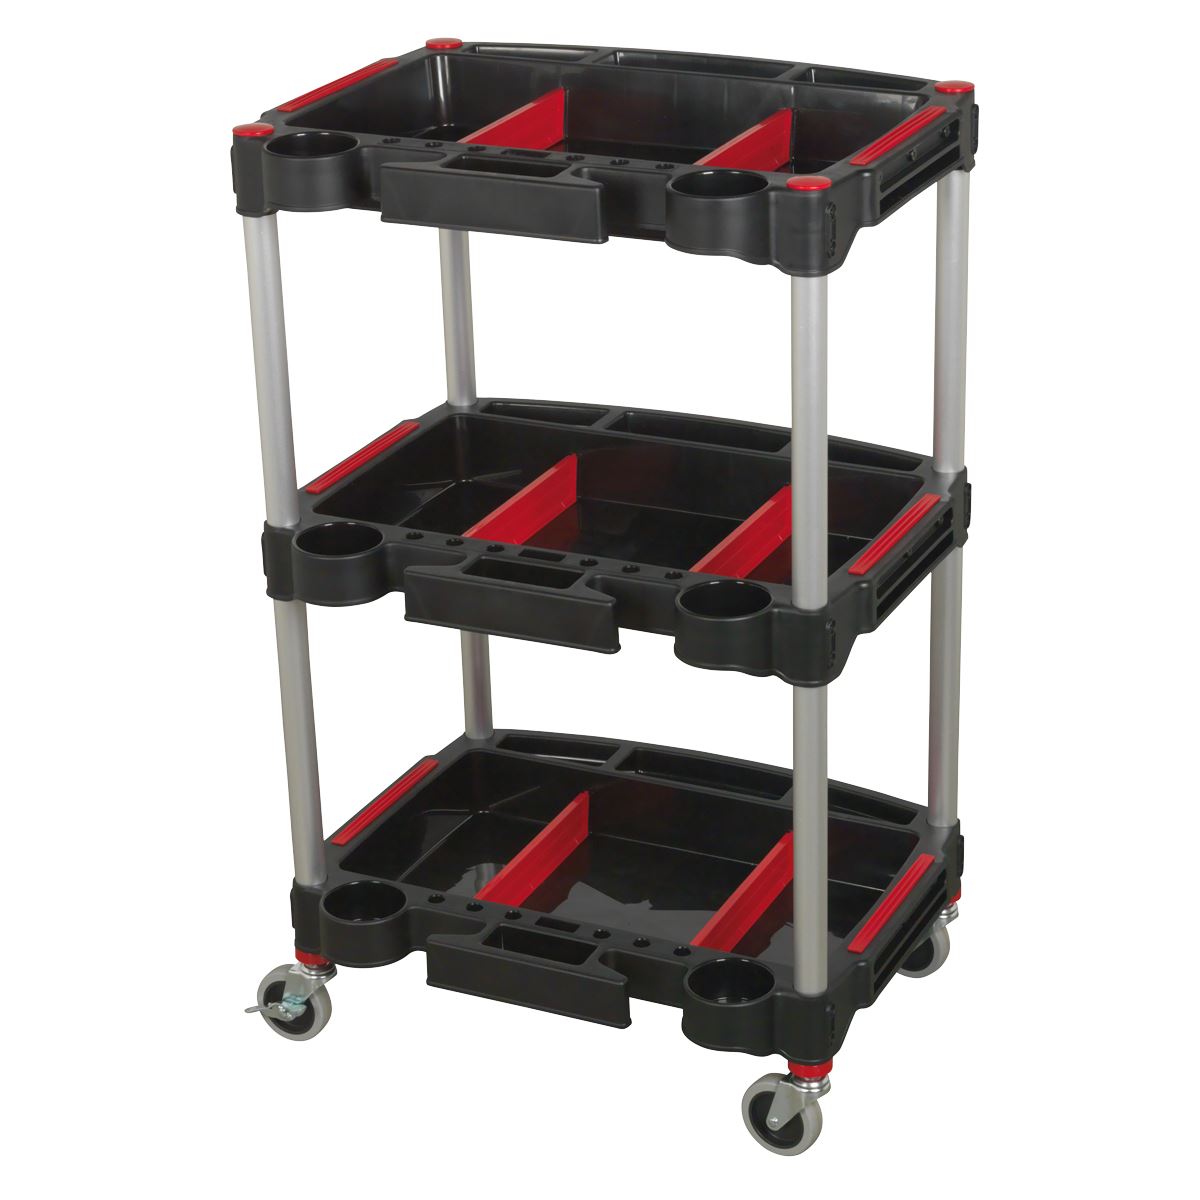 Sealey Workshop Trolley 3-Level Composite with Parts Storage